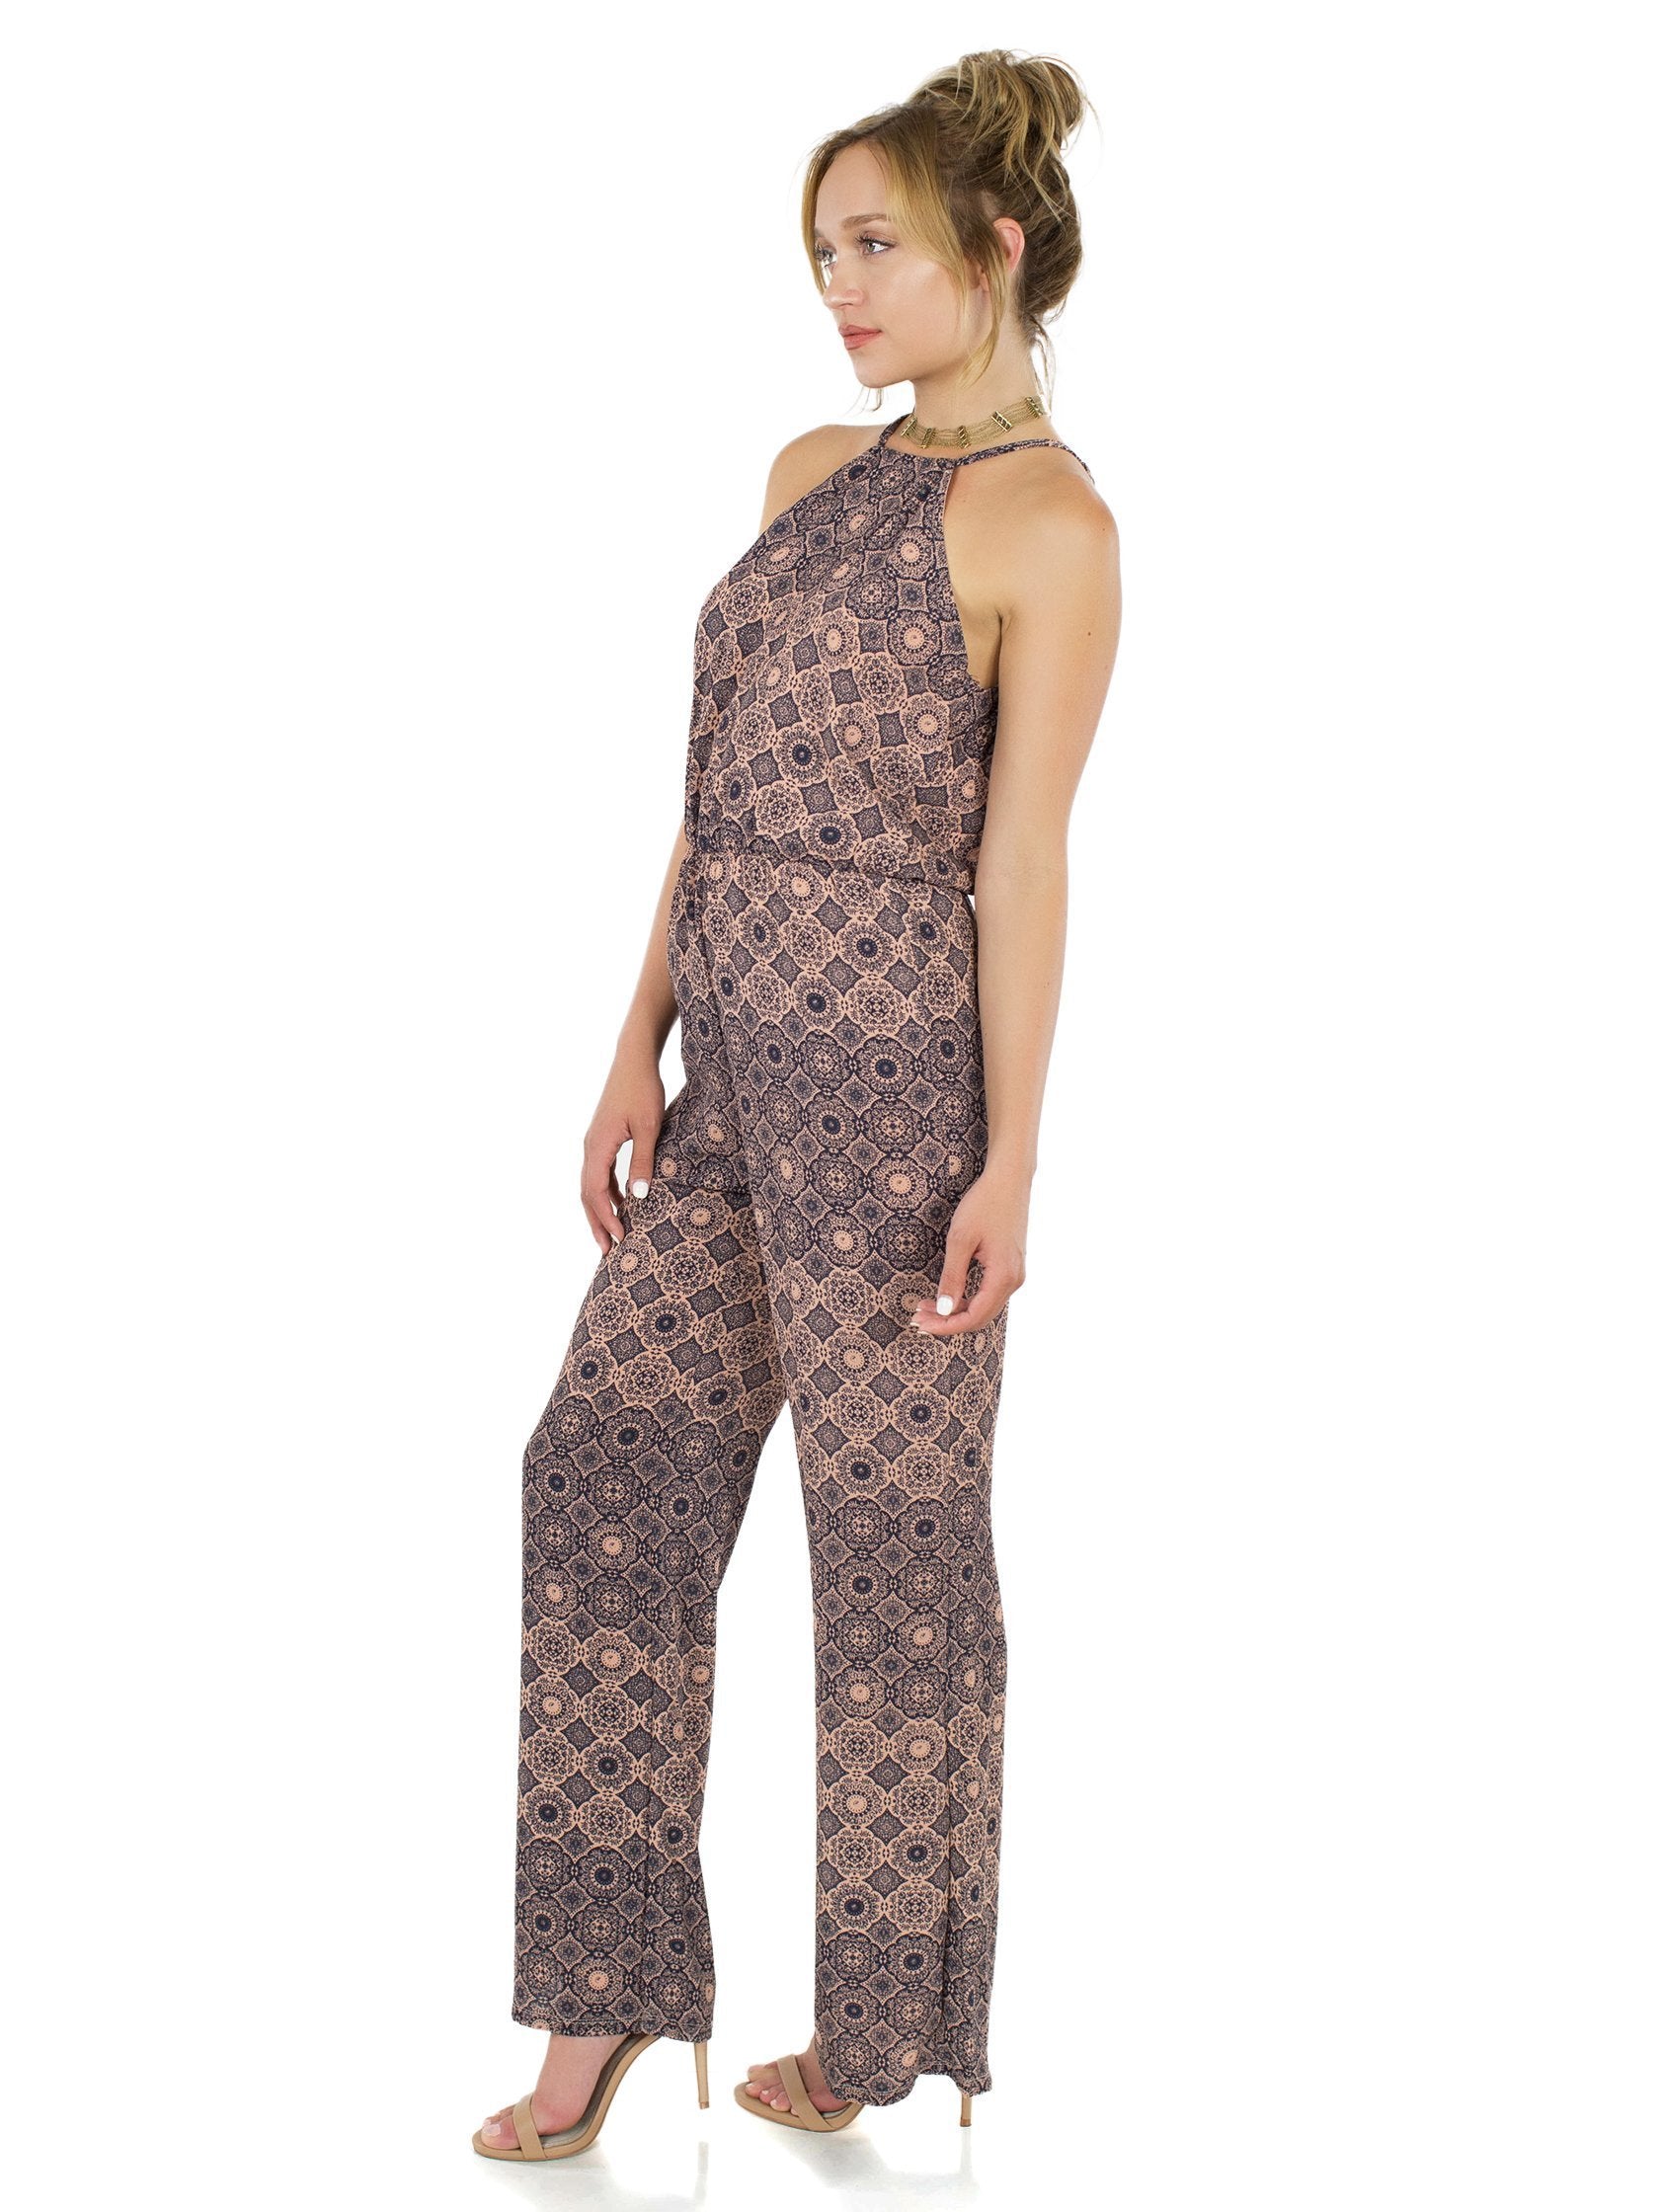 Woman wearing a jumpsuit rental from FashionPass called Desert Sky Jumpsuit